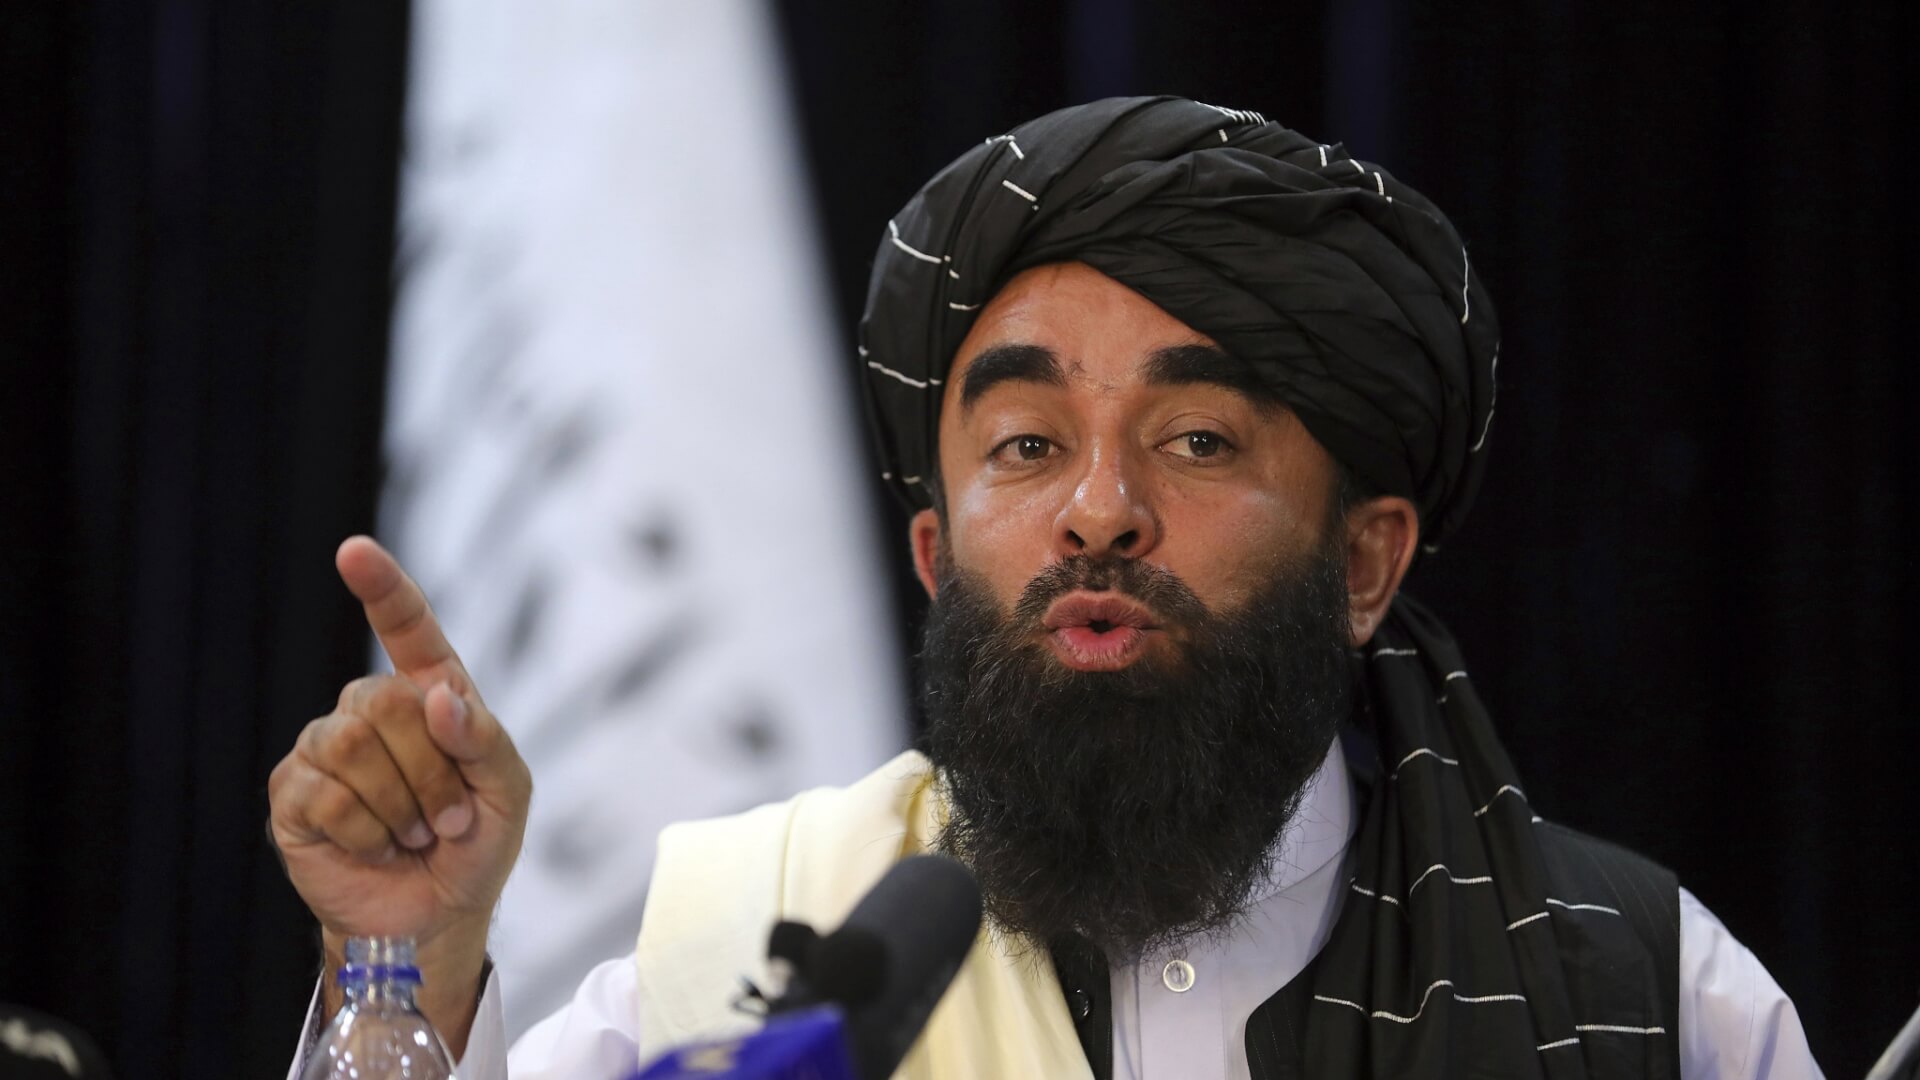 Anti-Sharia Law “Not Implementable”, Says Taliban